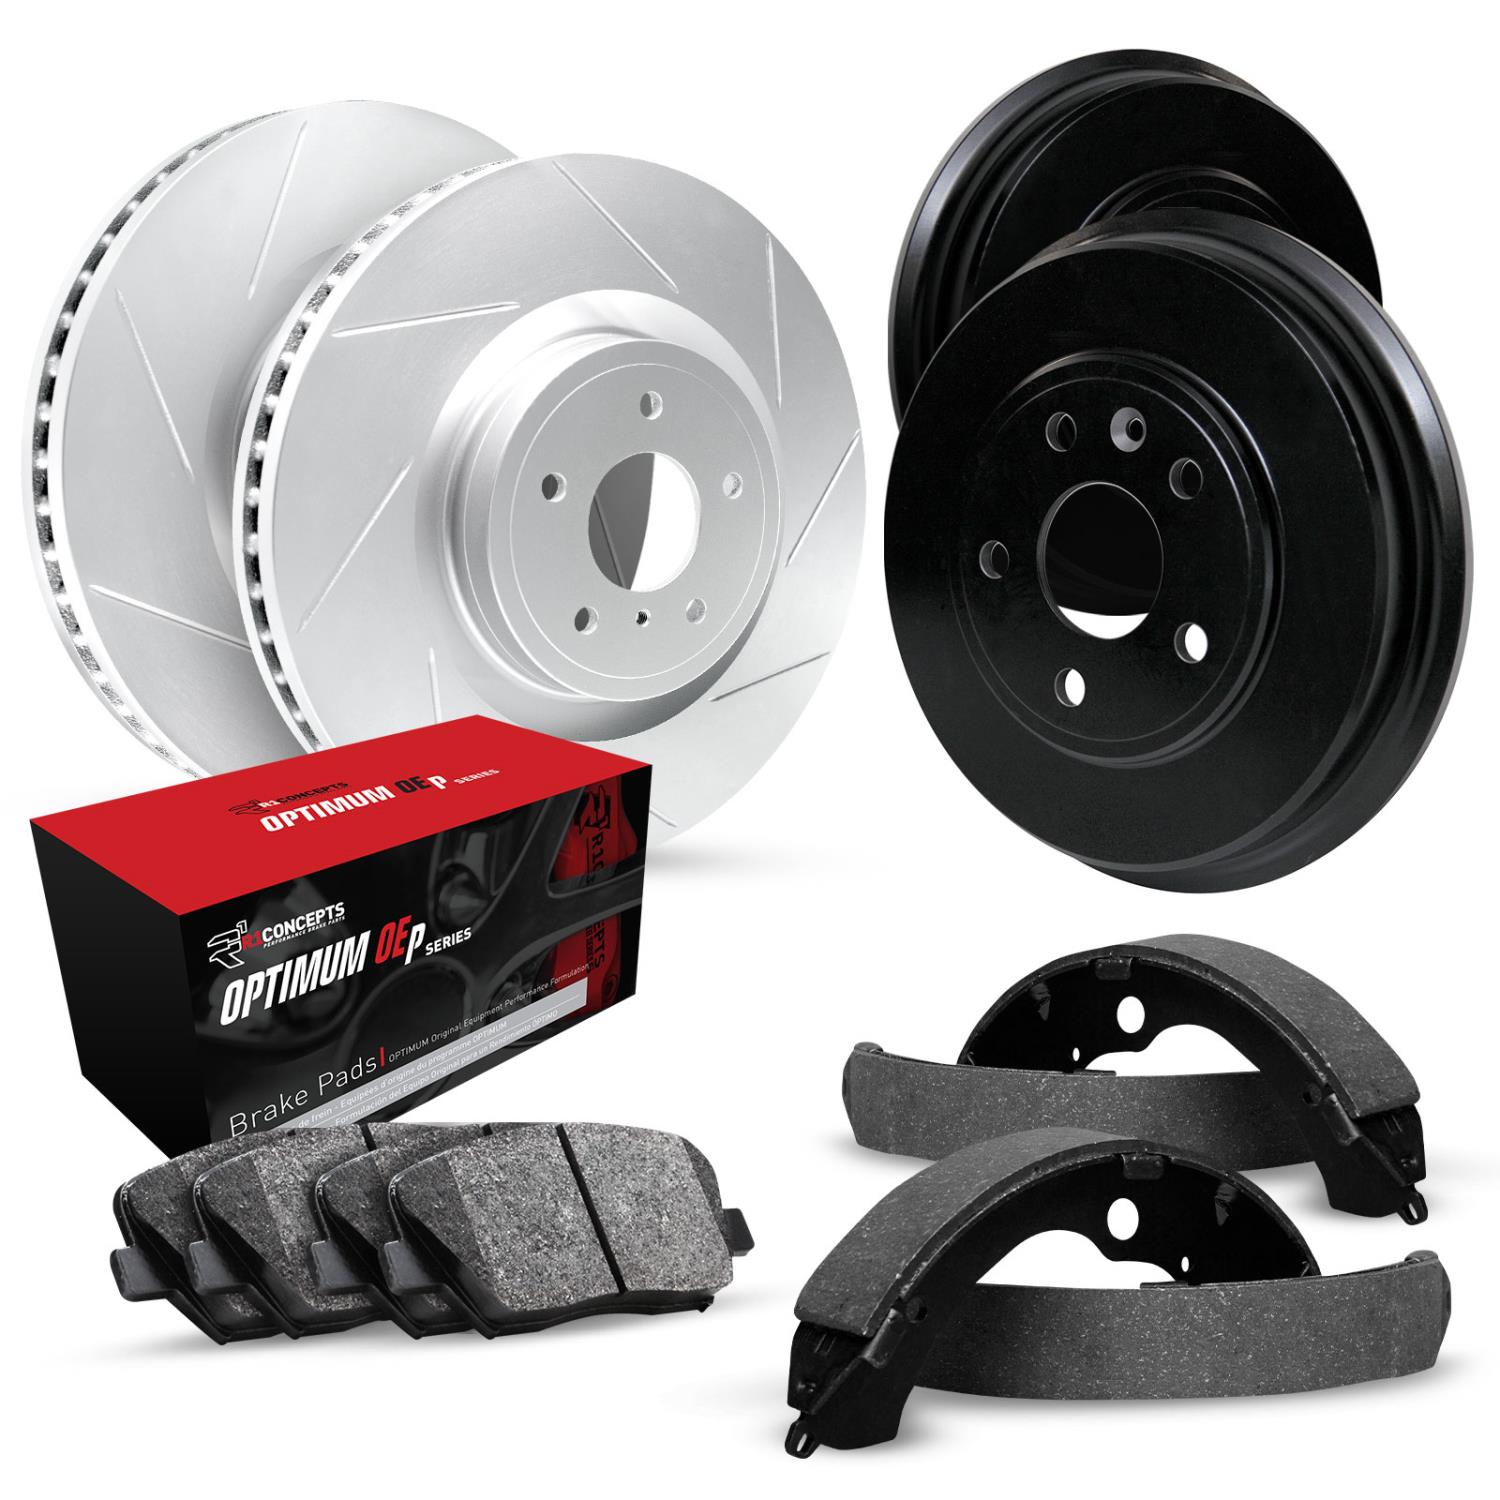 GEO-Carbon Slotted Brake Rotor & Drum Set w/Optimum OE Pads & Shoes, 1980-1989 Ford/Lincoln/Mercury/Mazda